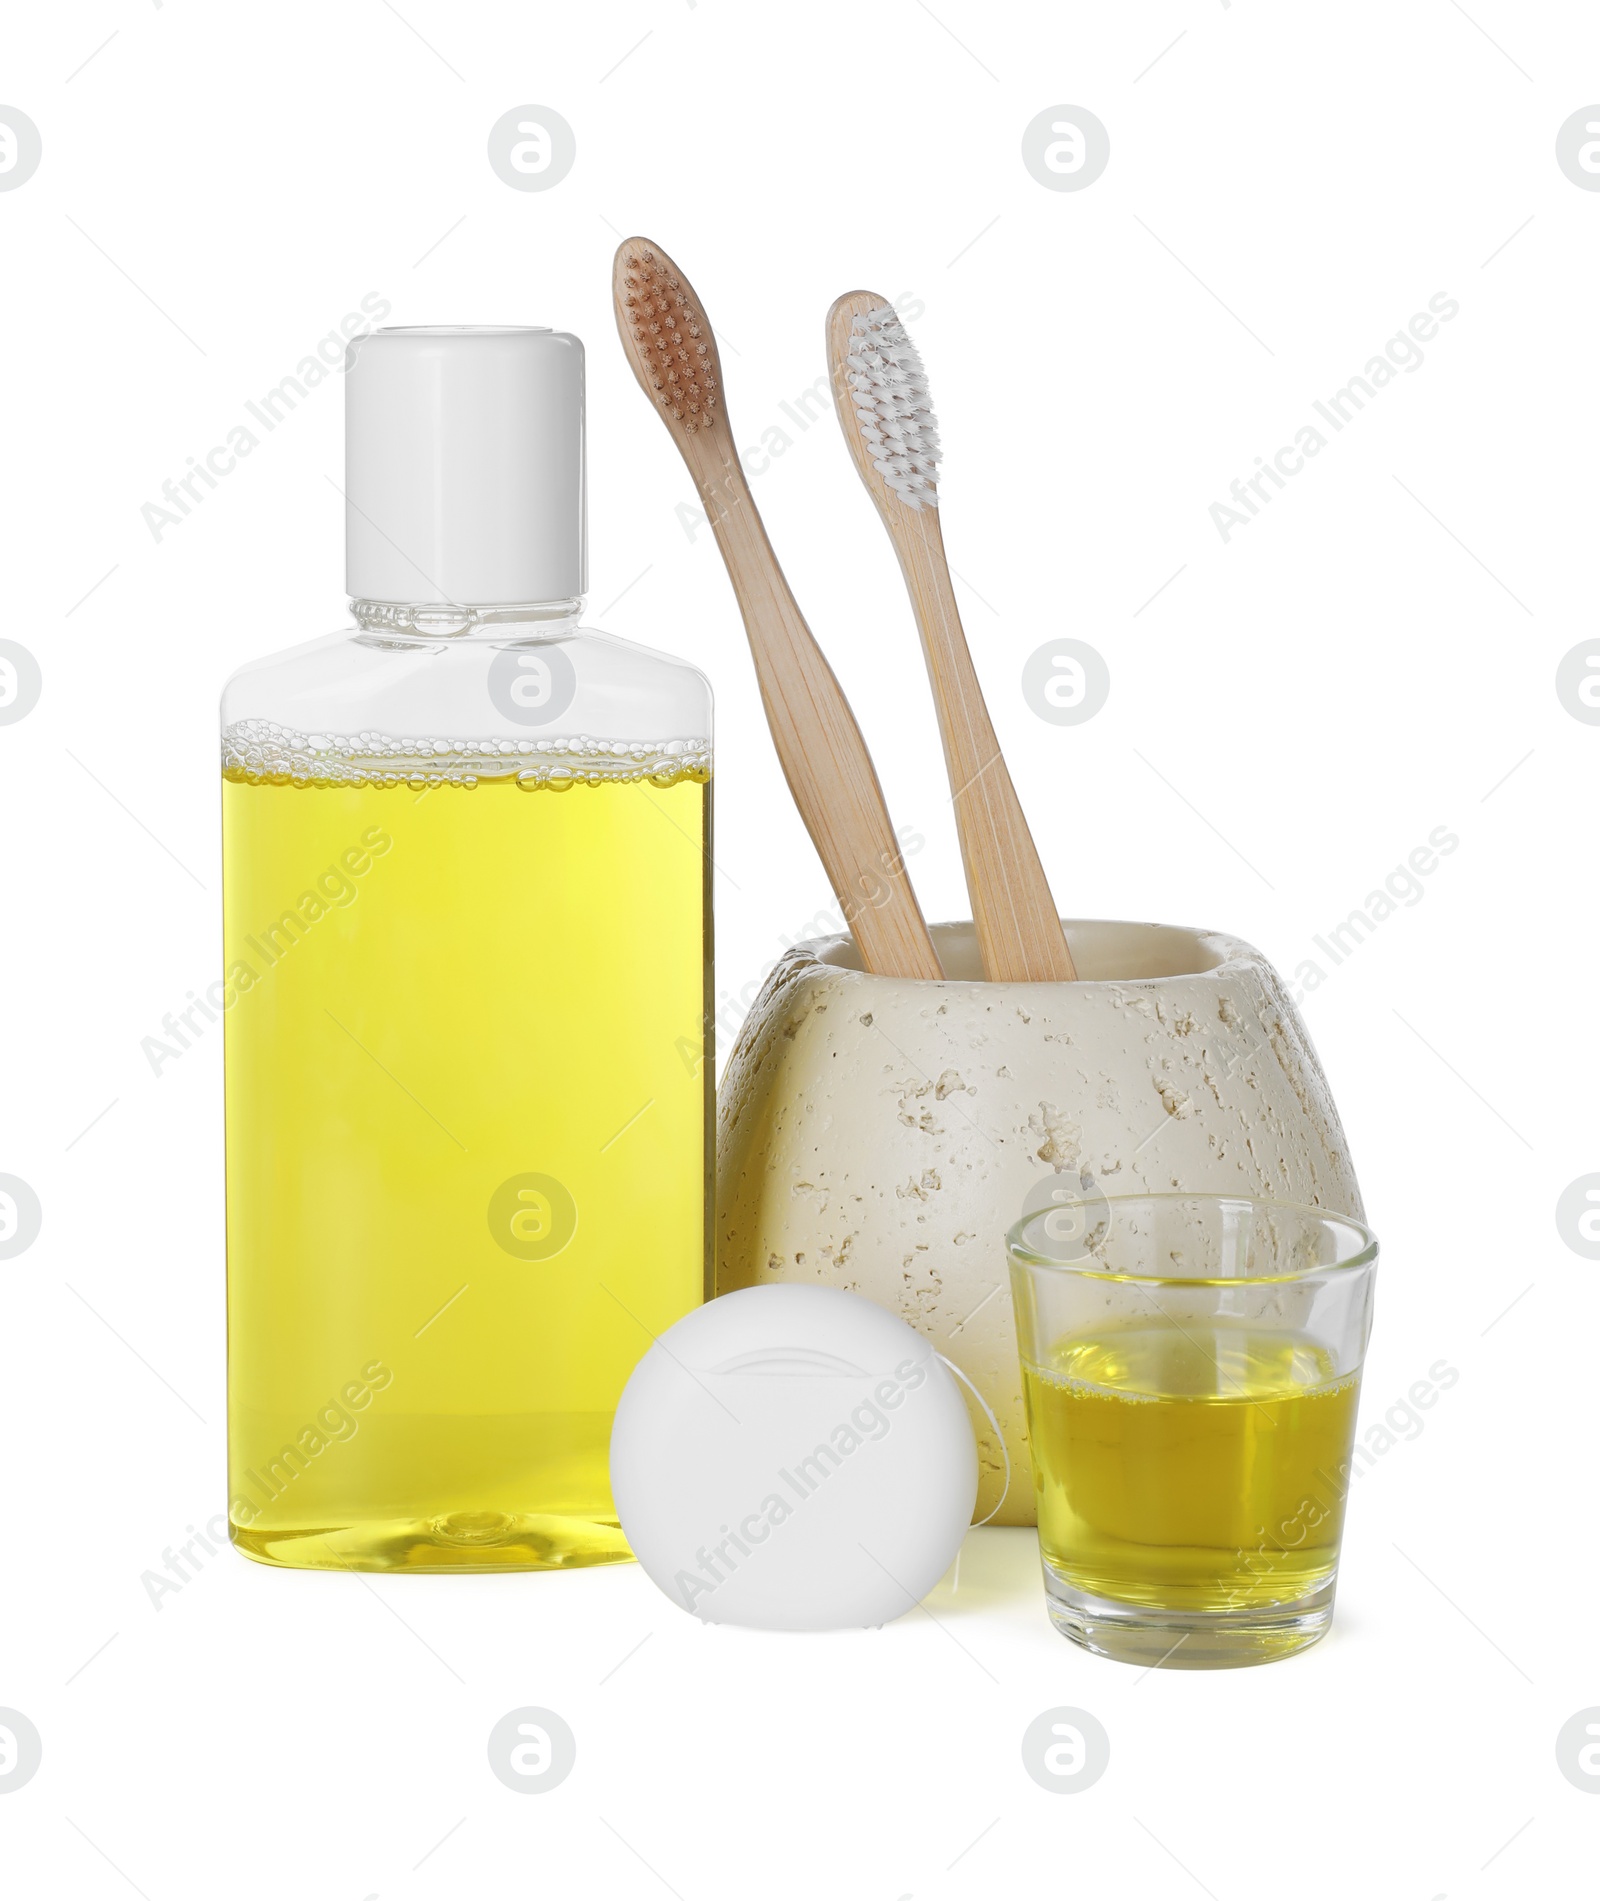 Photo of Mouthwash, toothbrushes and dental floss isolated on white